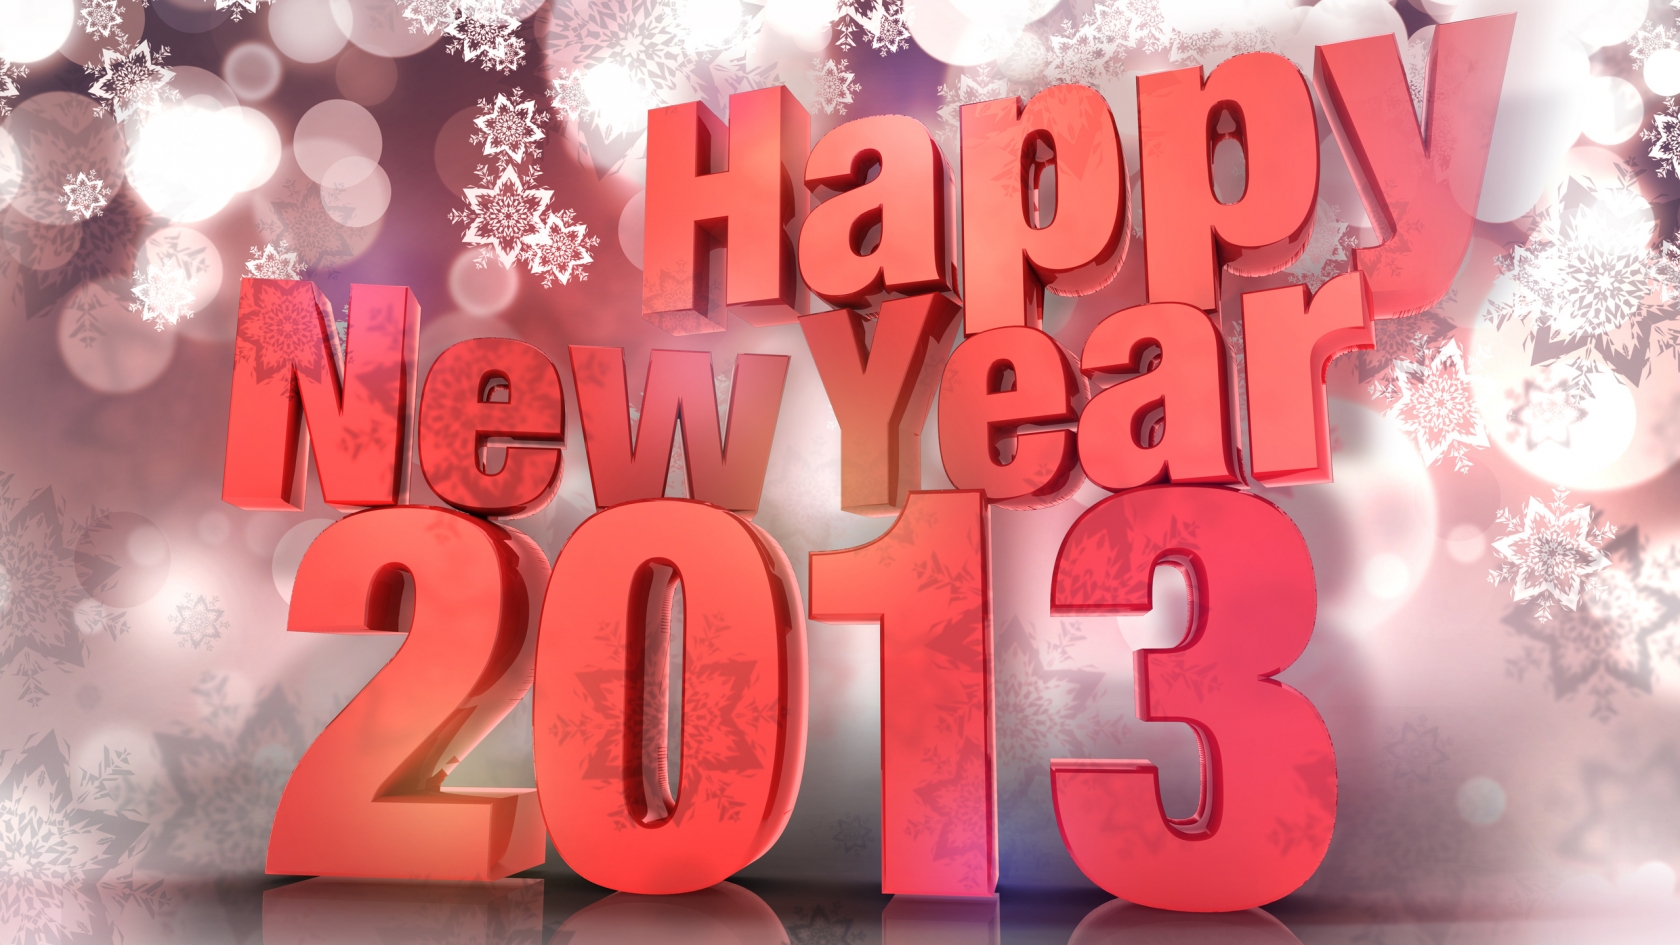 Happy New 2013 for 1680 x 945 HDTV resolution